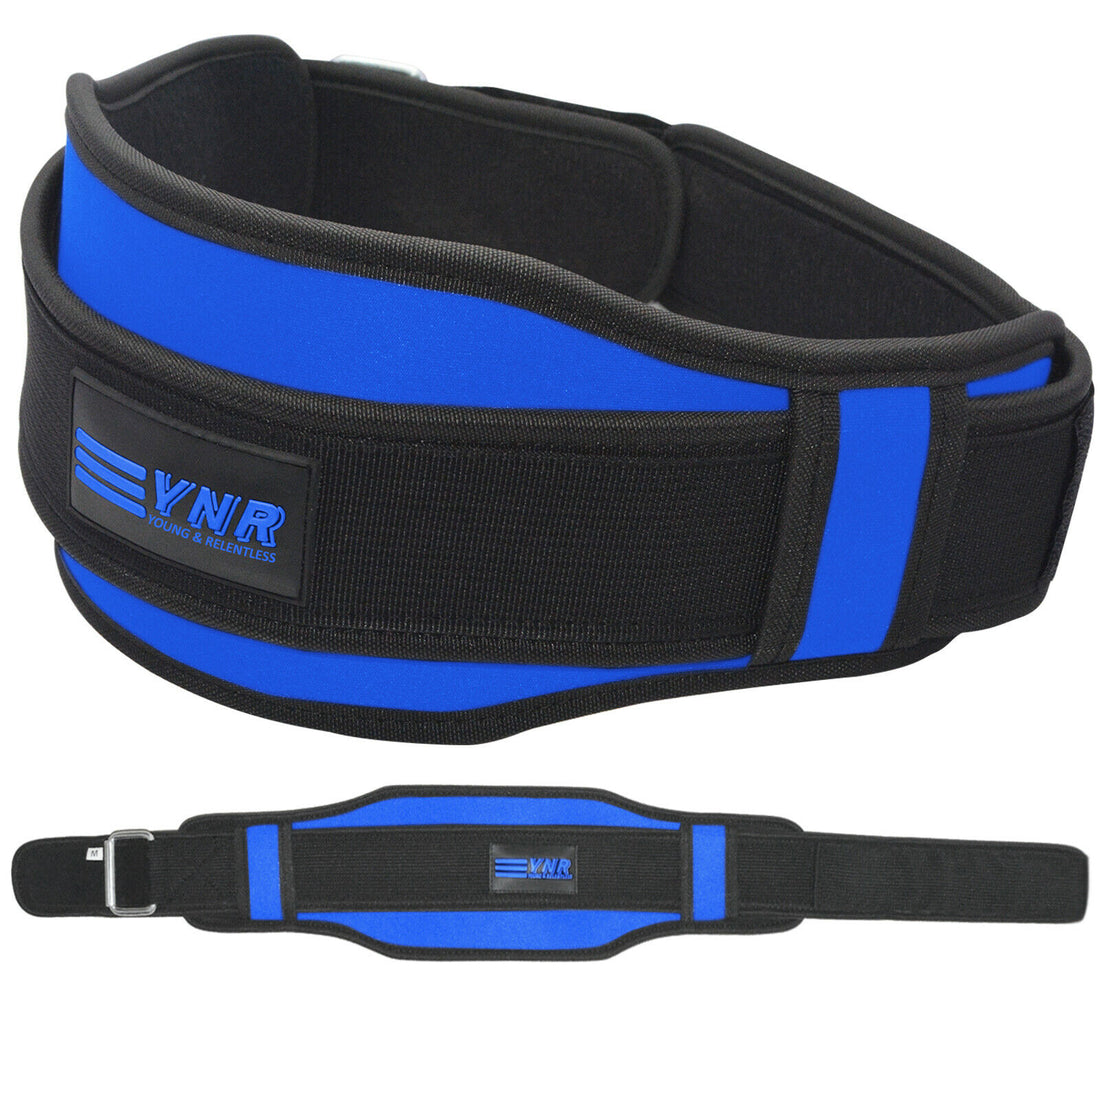 Weight Lifting Belt Gym Training Neoprene Fitness Workout Double Support